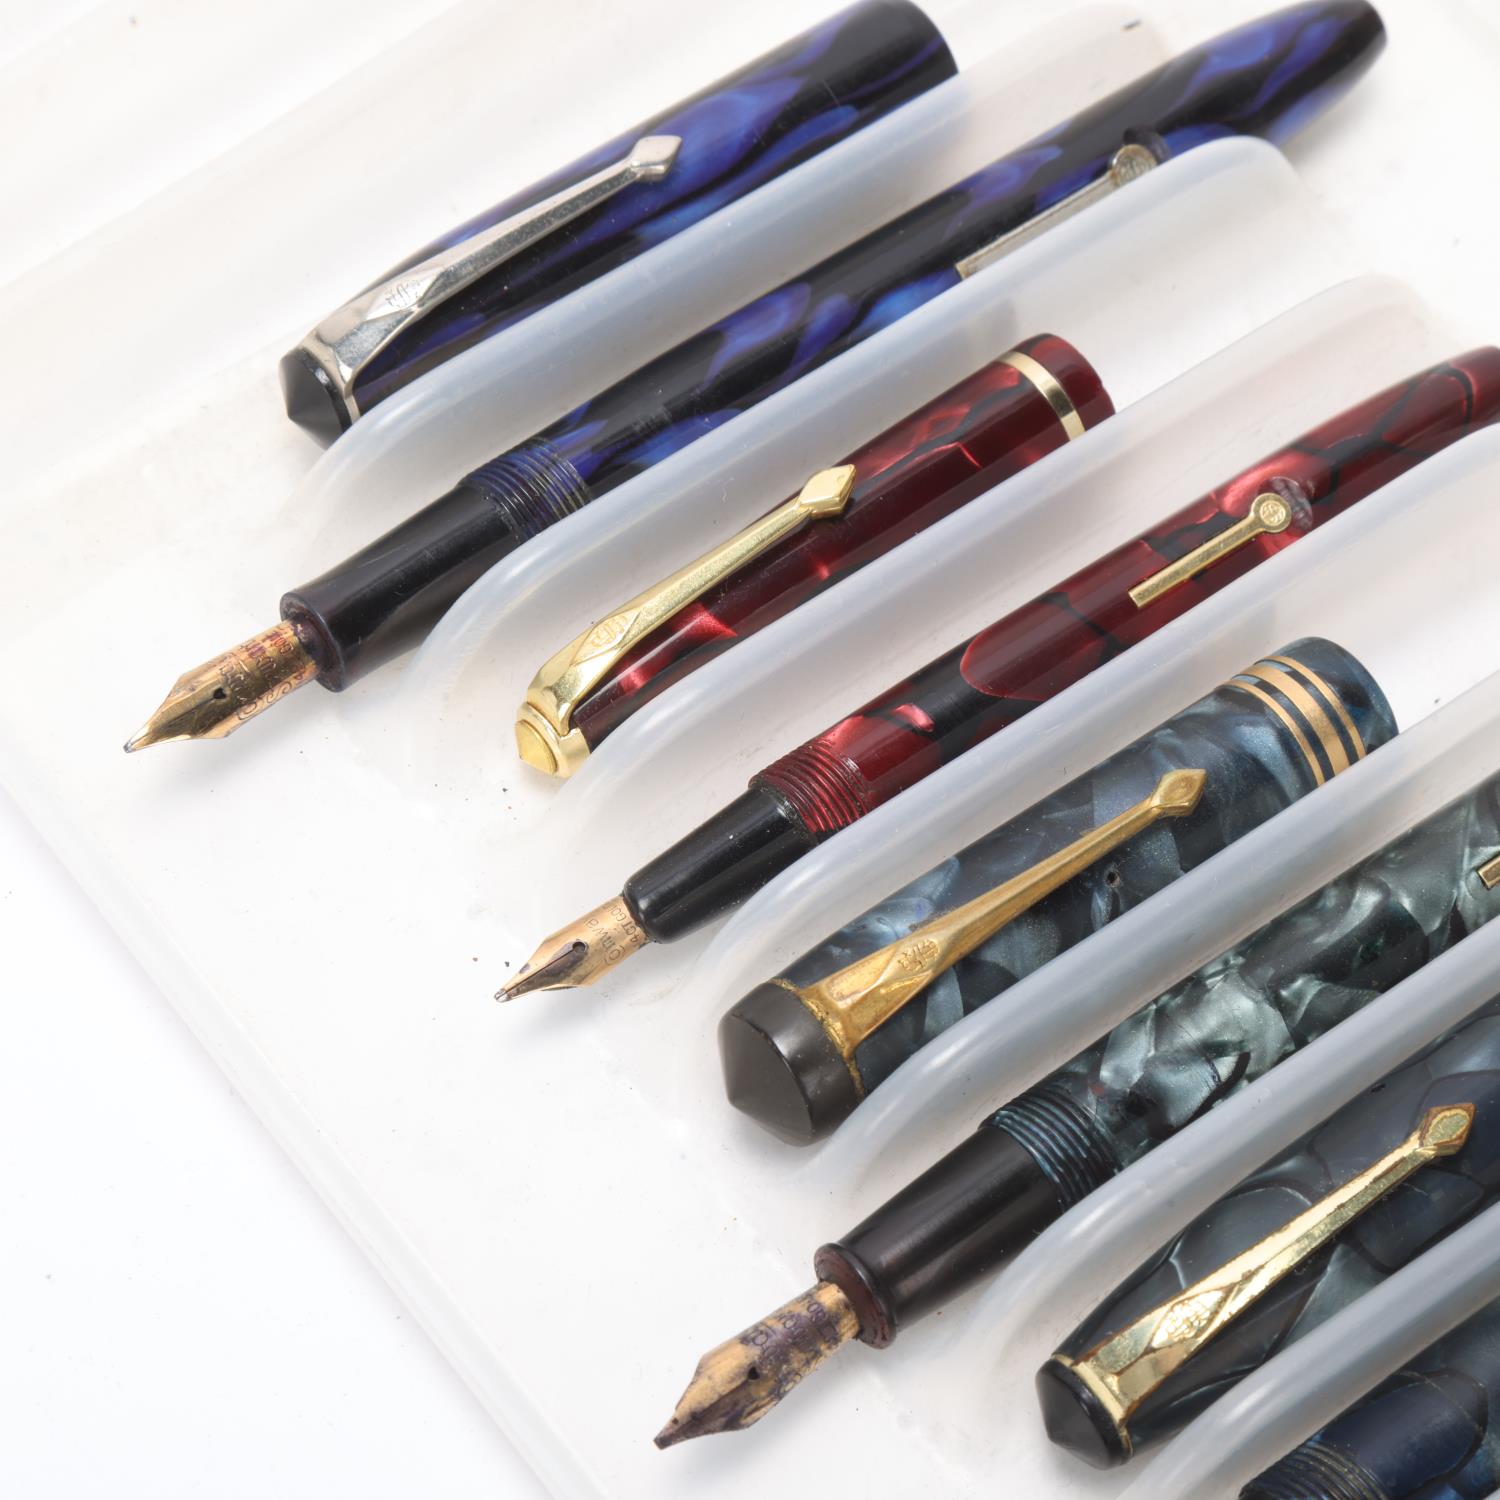 5 Vintage Conway Stewart fountain pens, all lever fill with marble resin bodies and 14ct gold - Image 3 of 4